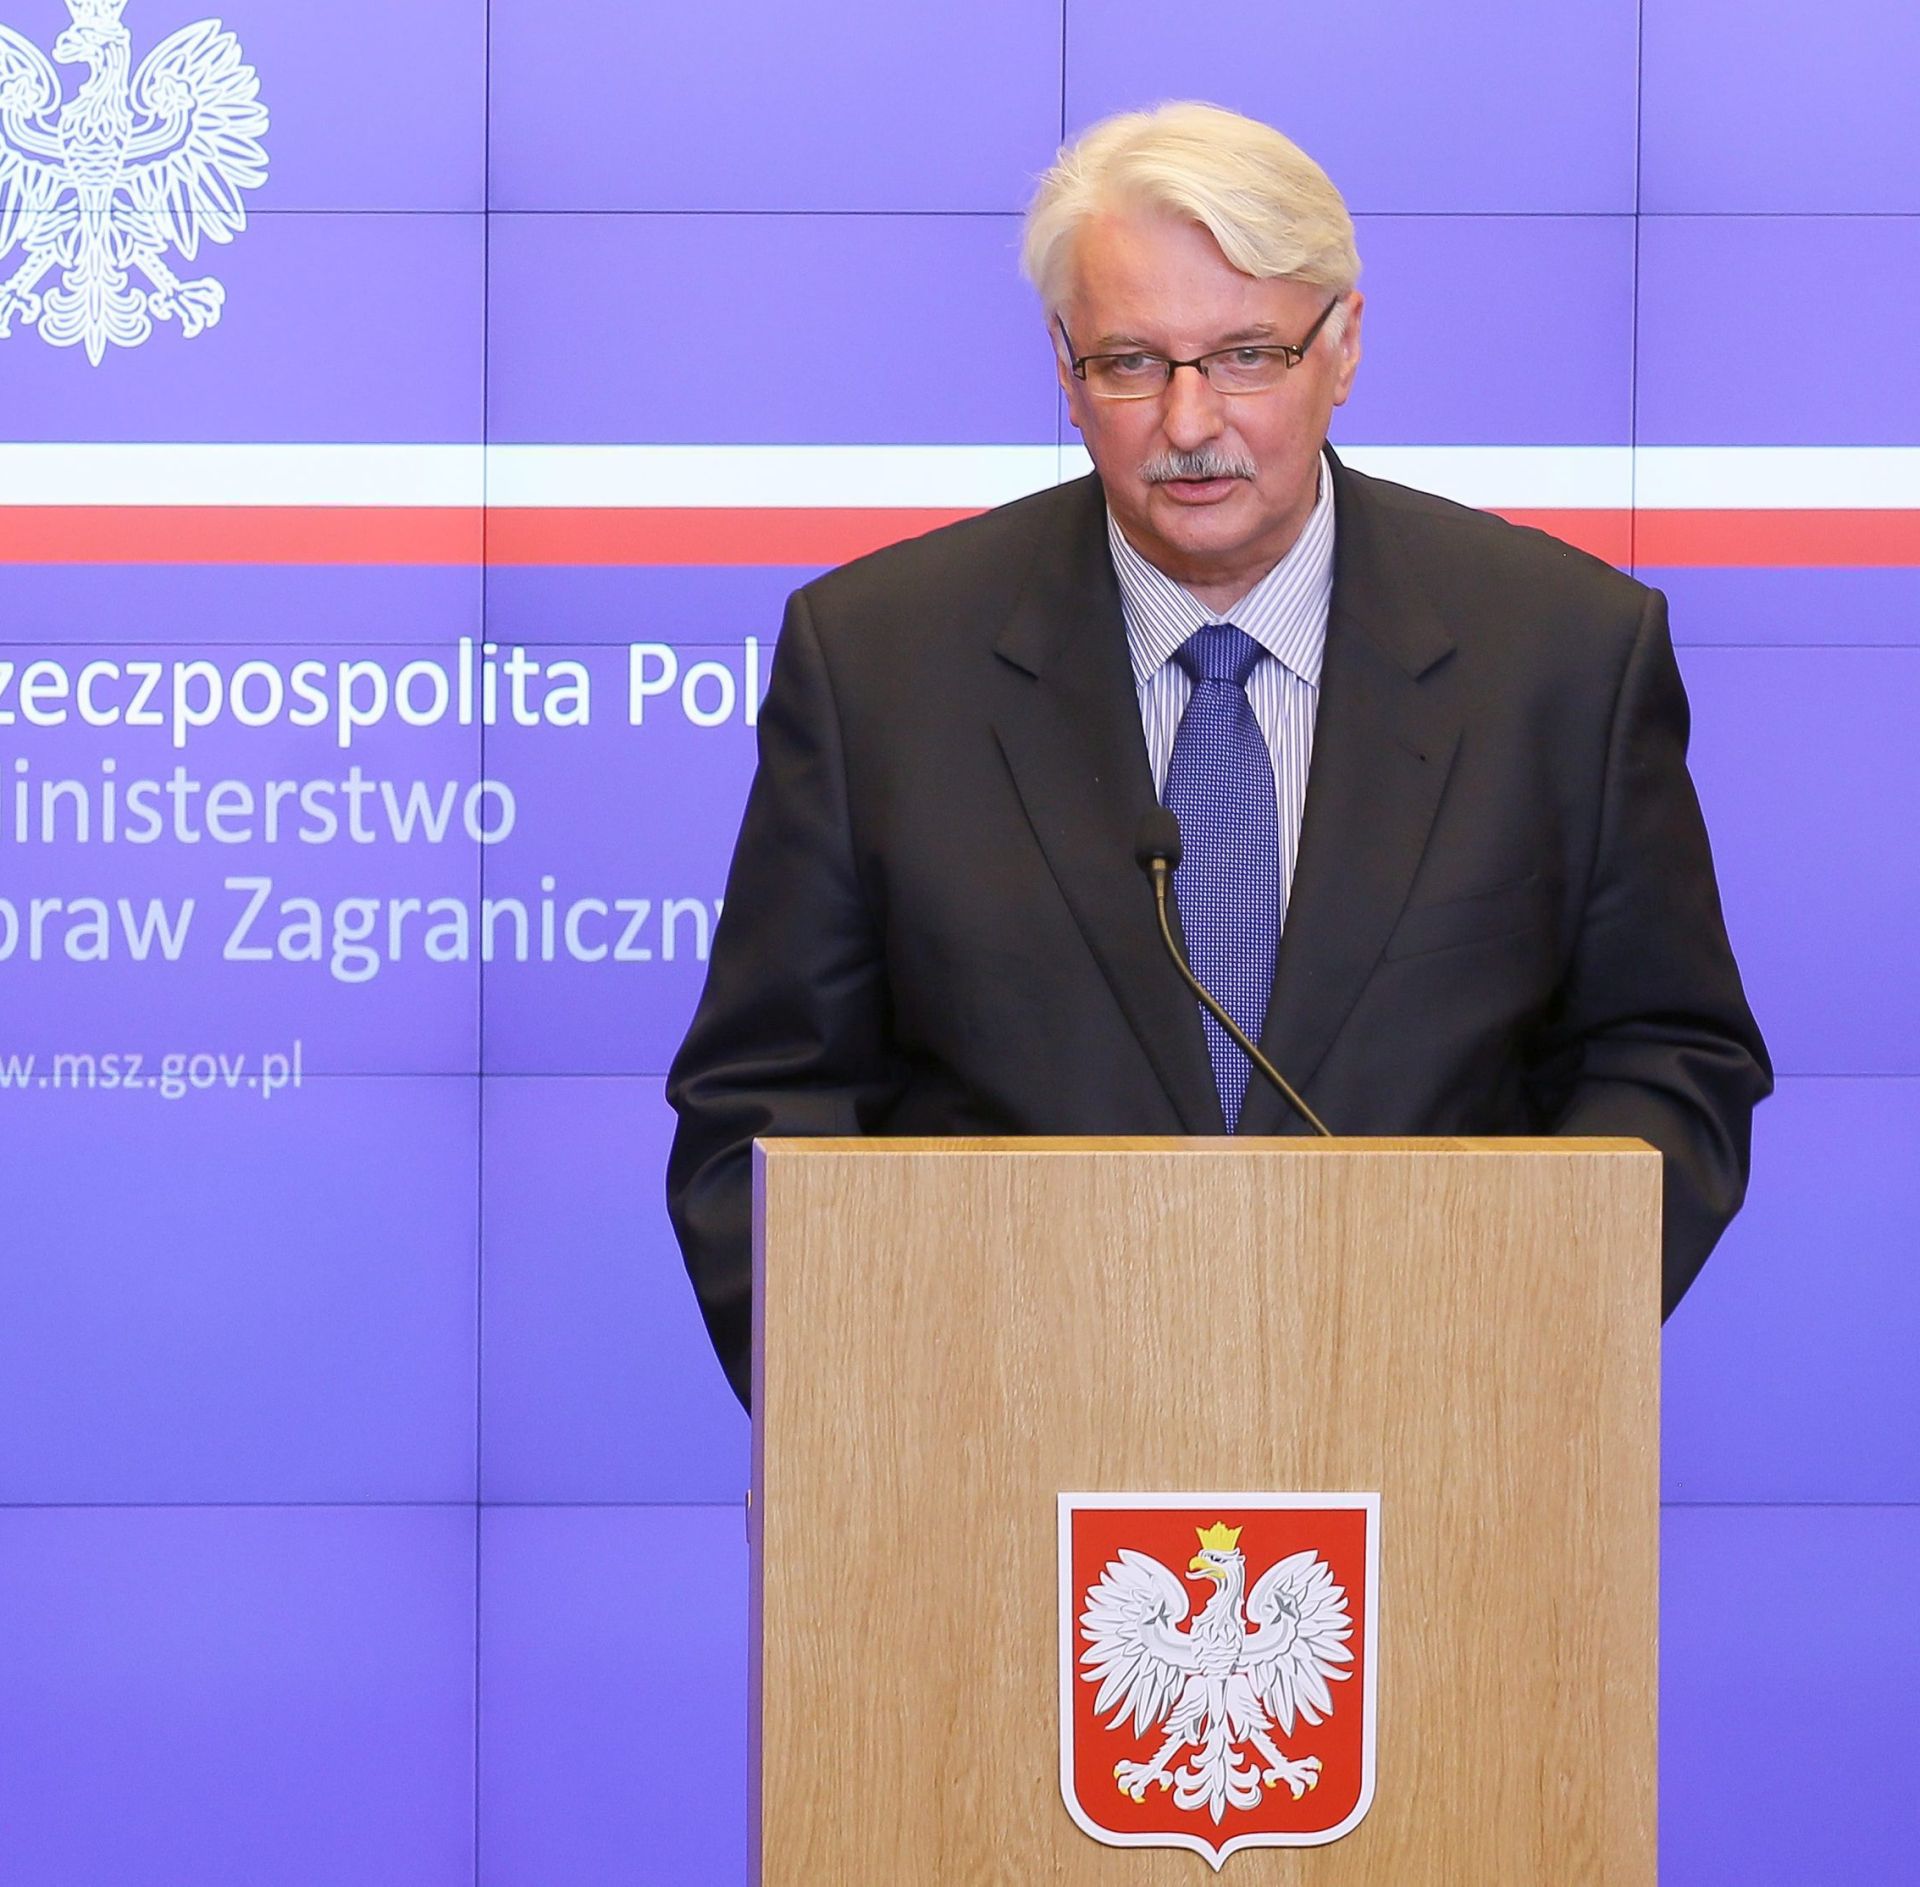 epa05296576 Polish Foreign Minister Witold Waszczykowski (R) and Croatian Foreign Minister Miro Kovac (L) attend a press conference after a meeting in Warsaw, Poland, 09 May 2016. The meeting was on the strengthening of cooperation of Central European countries.  EPA/PAWEL SUPERNAK POLAND OUT